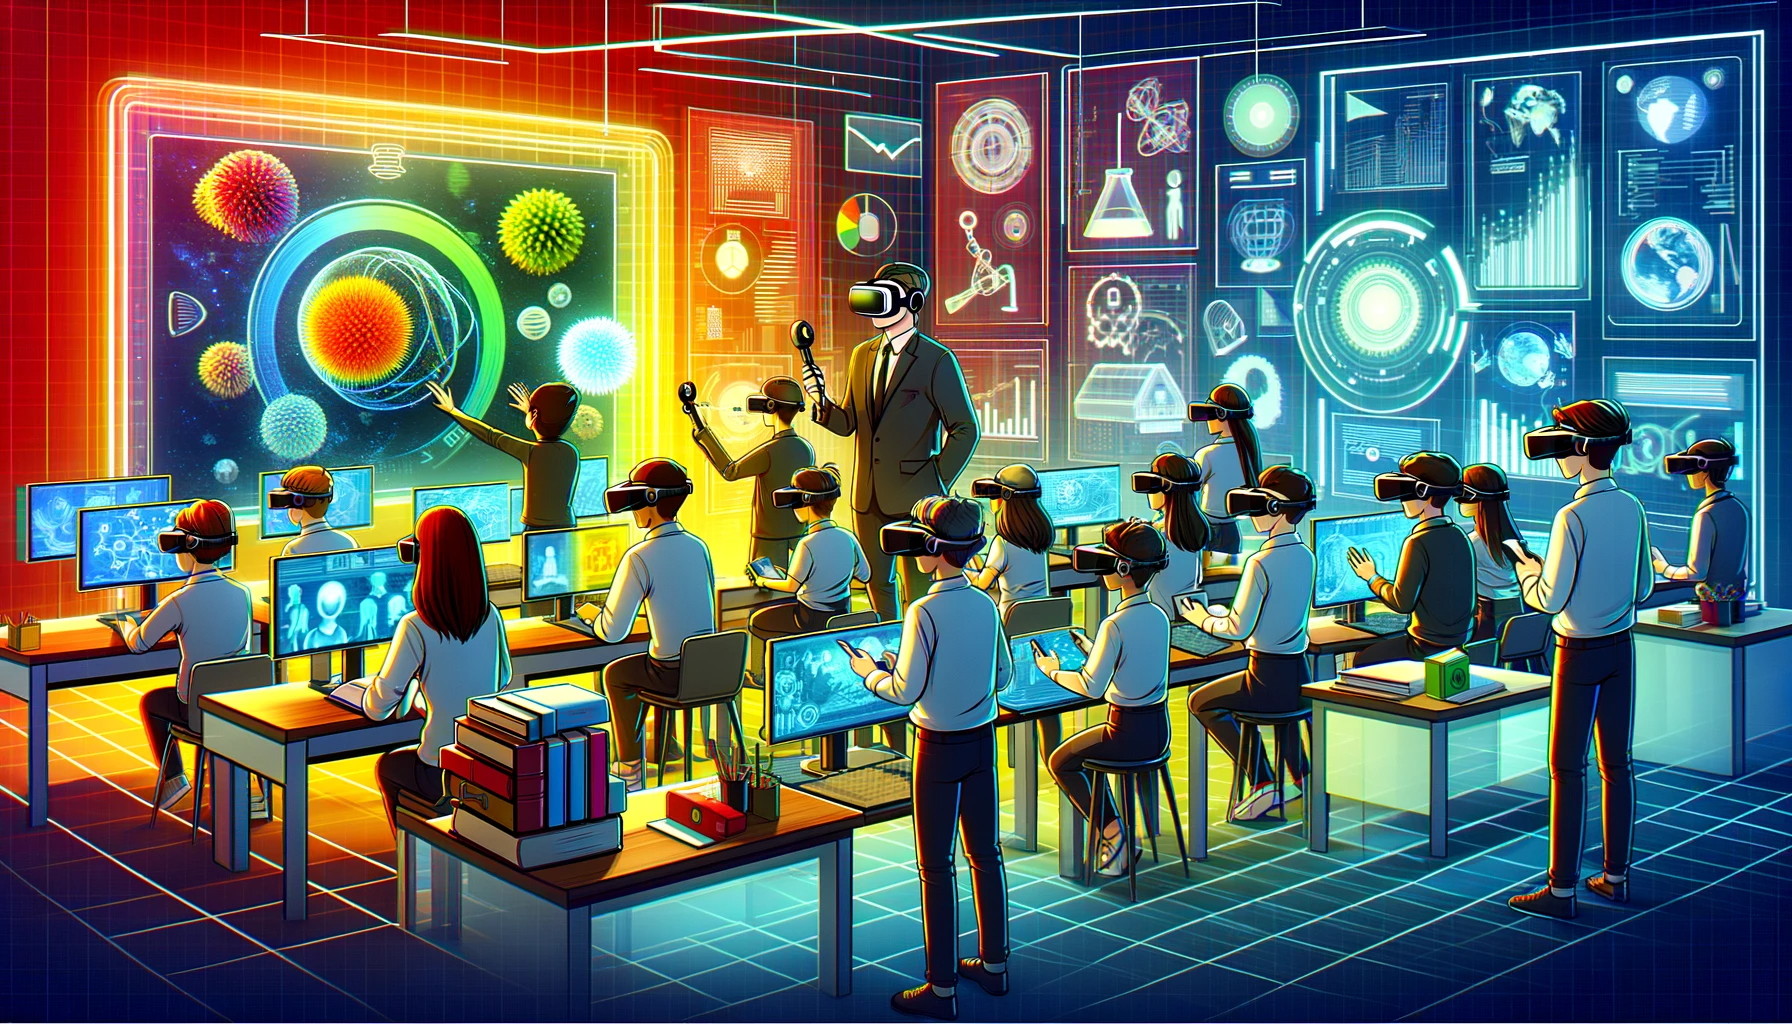 How can virtual reality help students learn more efficiently?